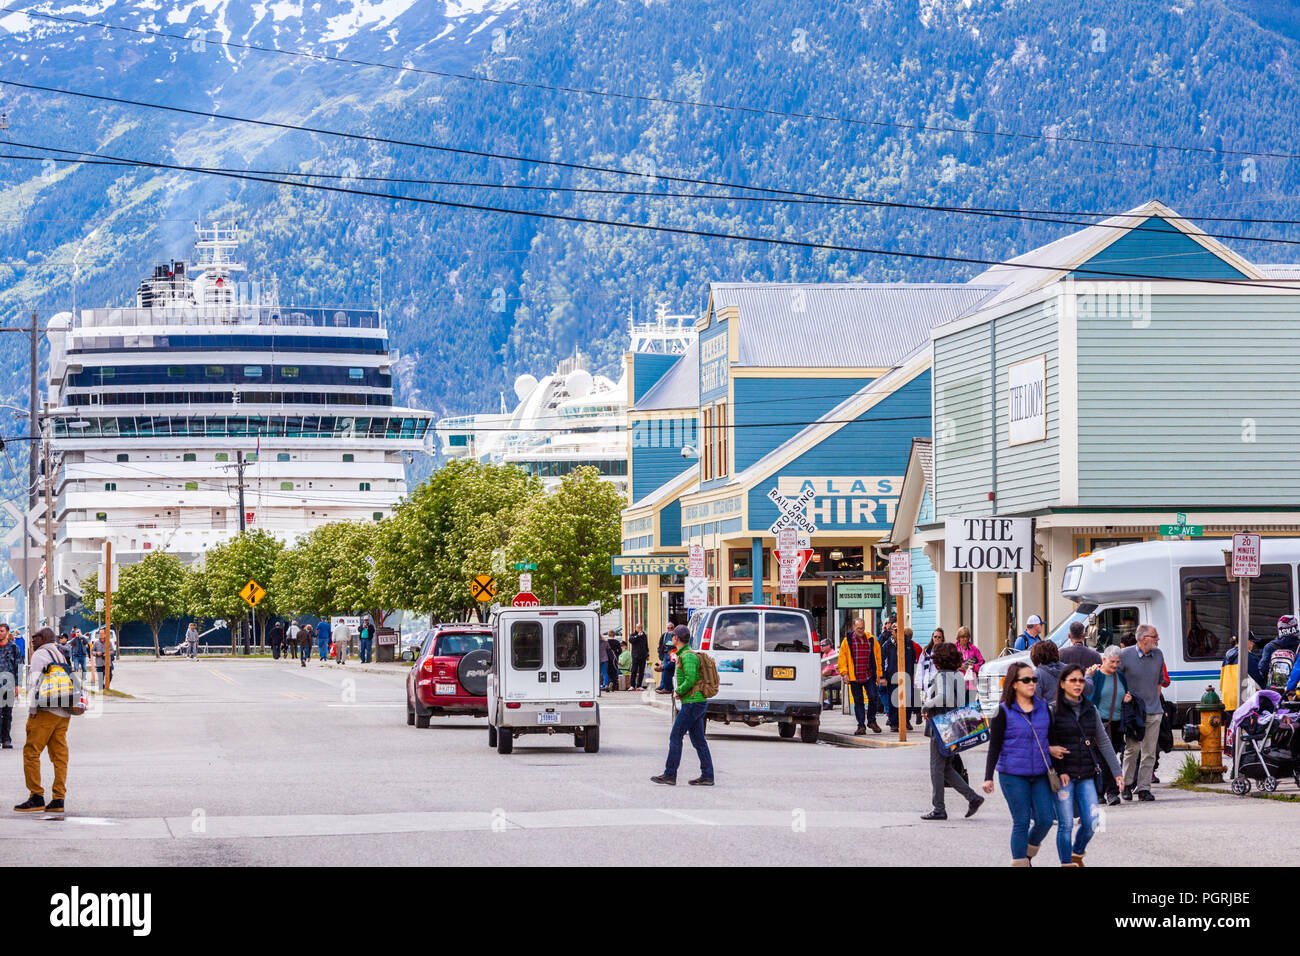 Cruise liners in the harbour very close to the tourist shops in the main street in Skagway, Alaska USA Stock Photo